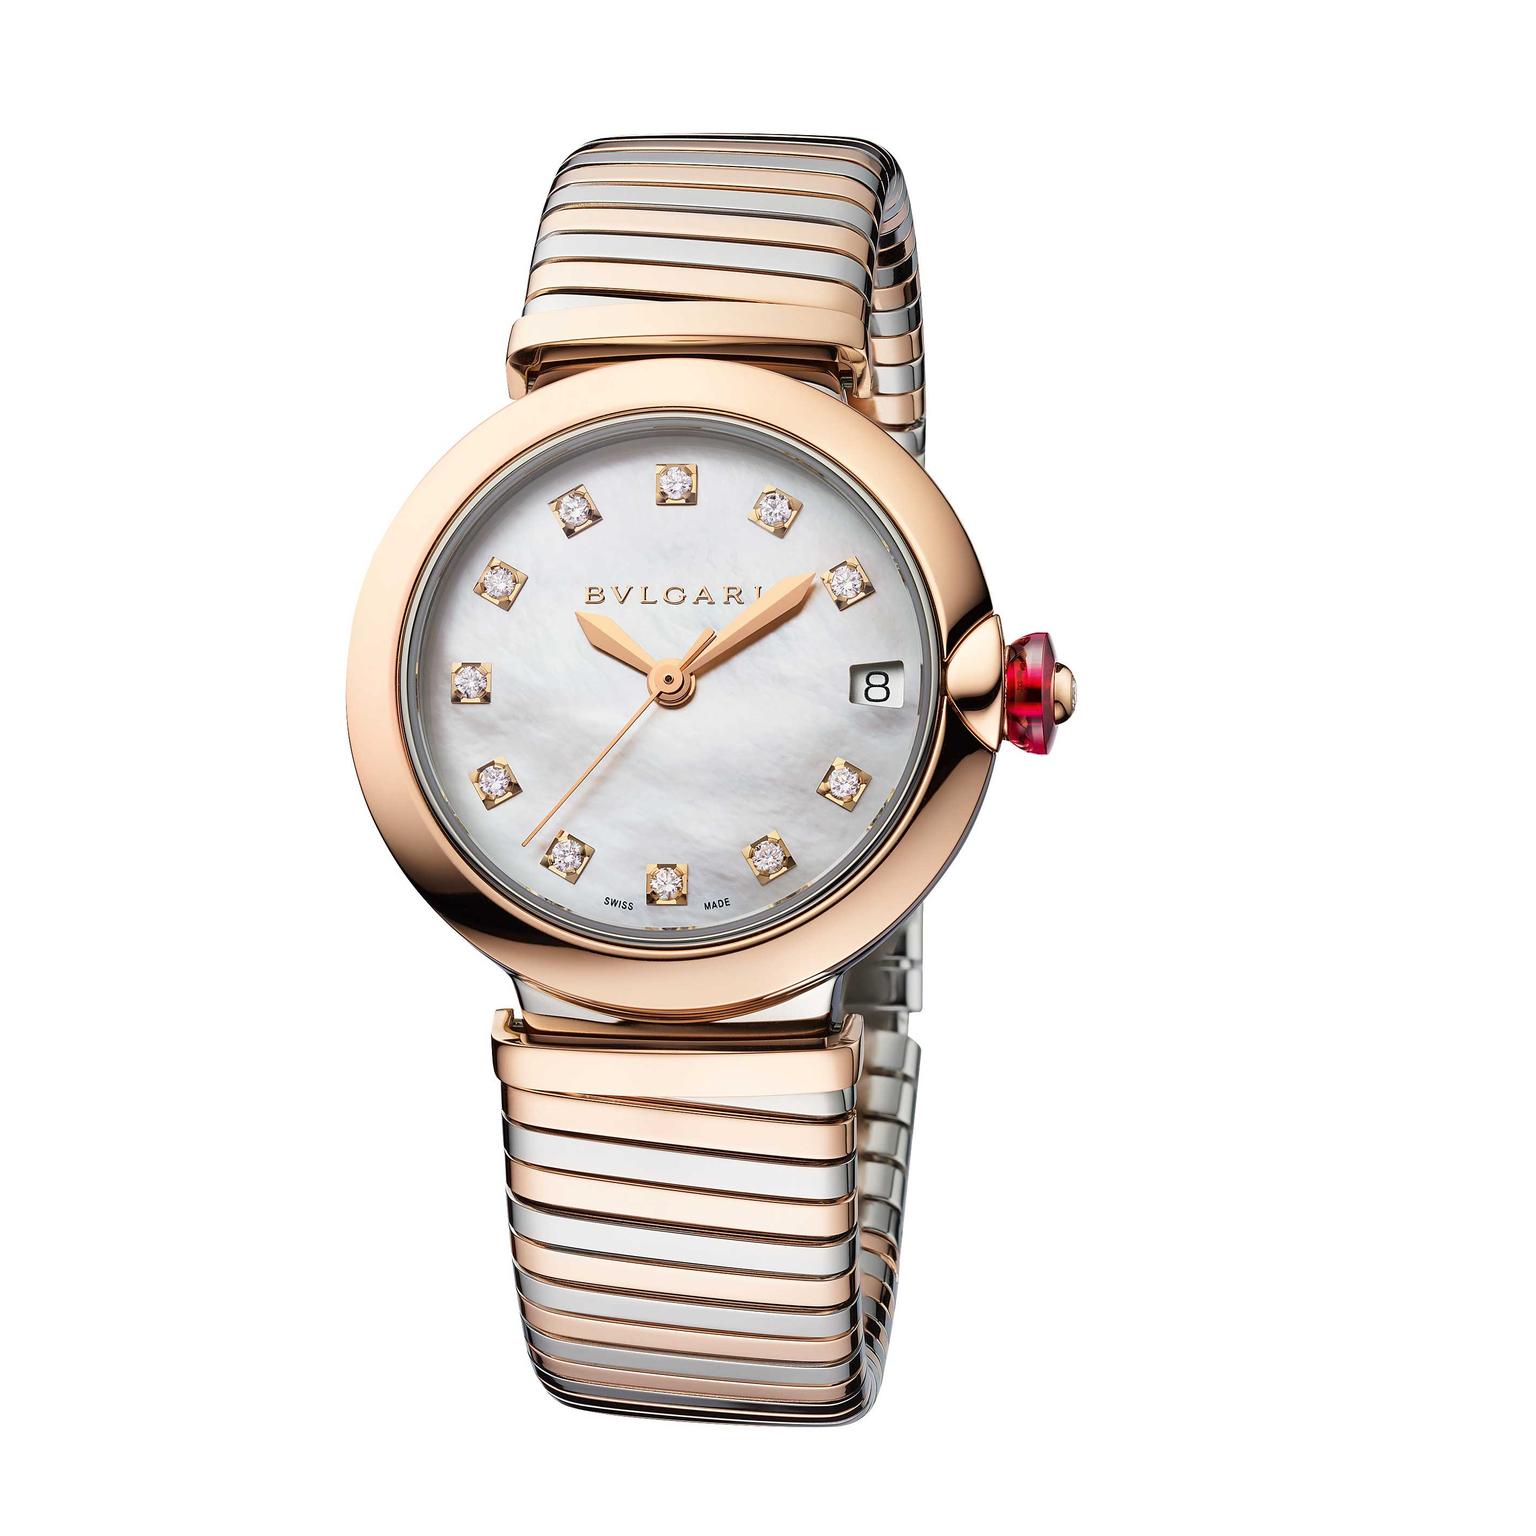 Bulgari Lvcea Tubogas 33mm stainless steel and rose gold watch  Price €10600